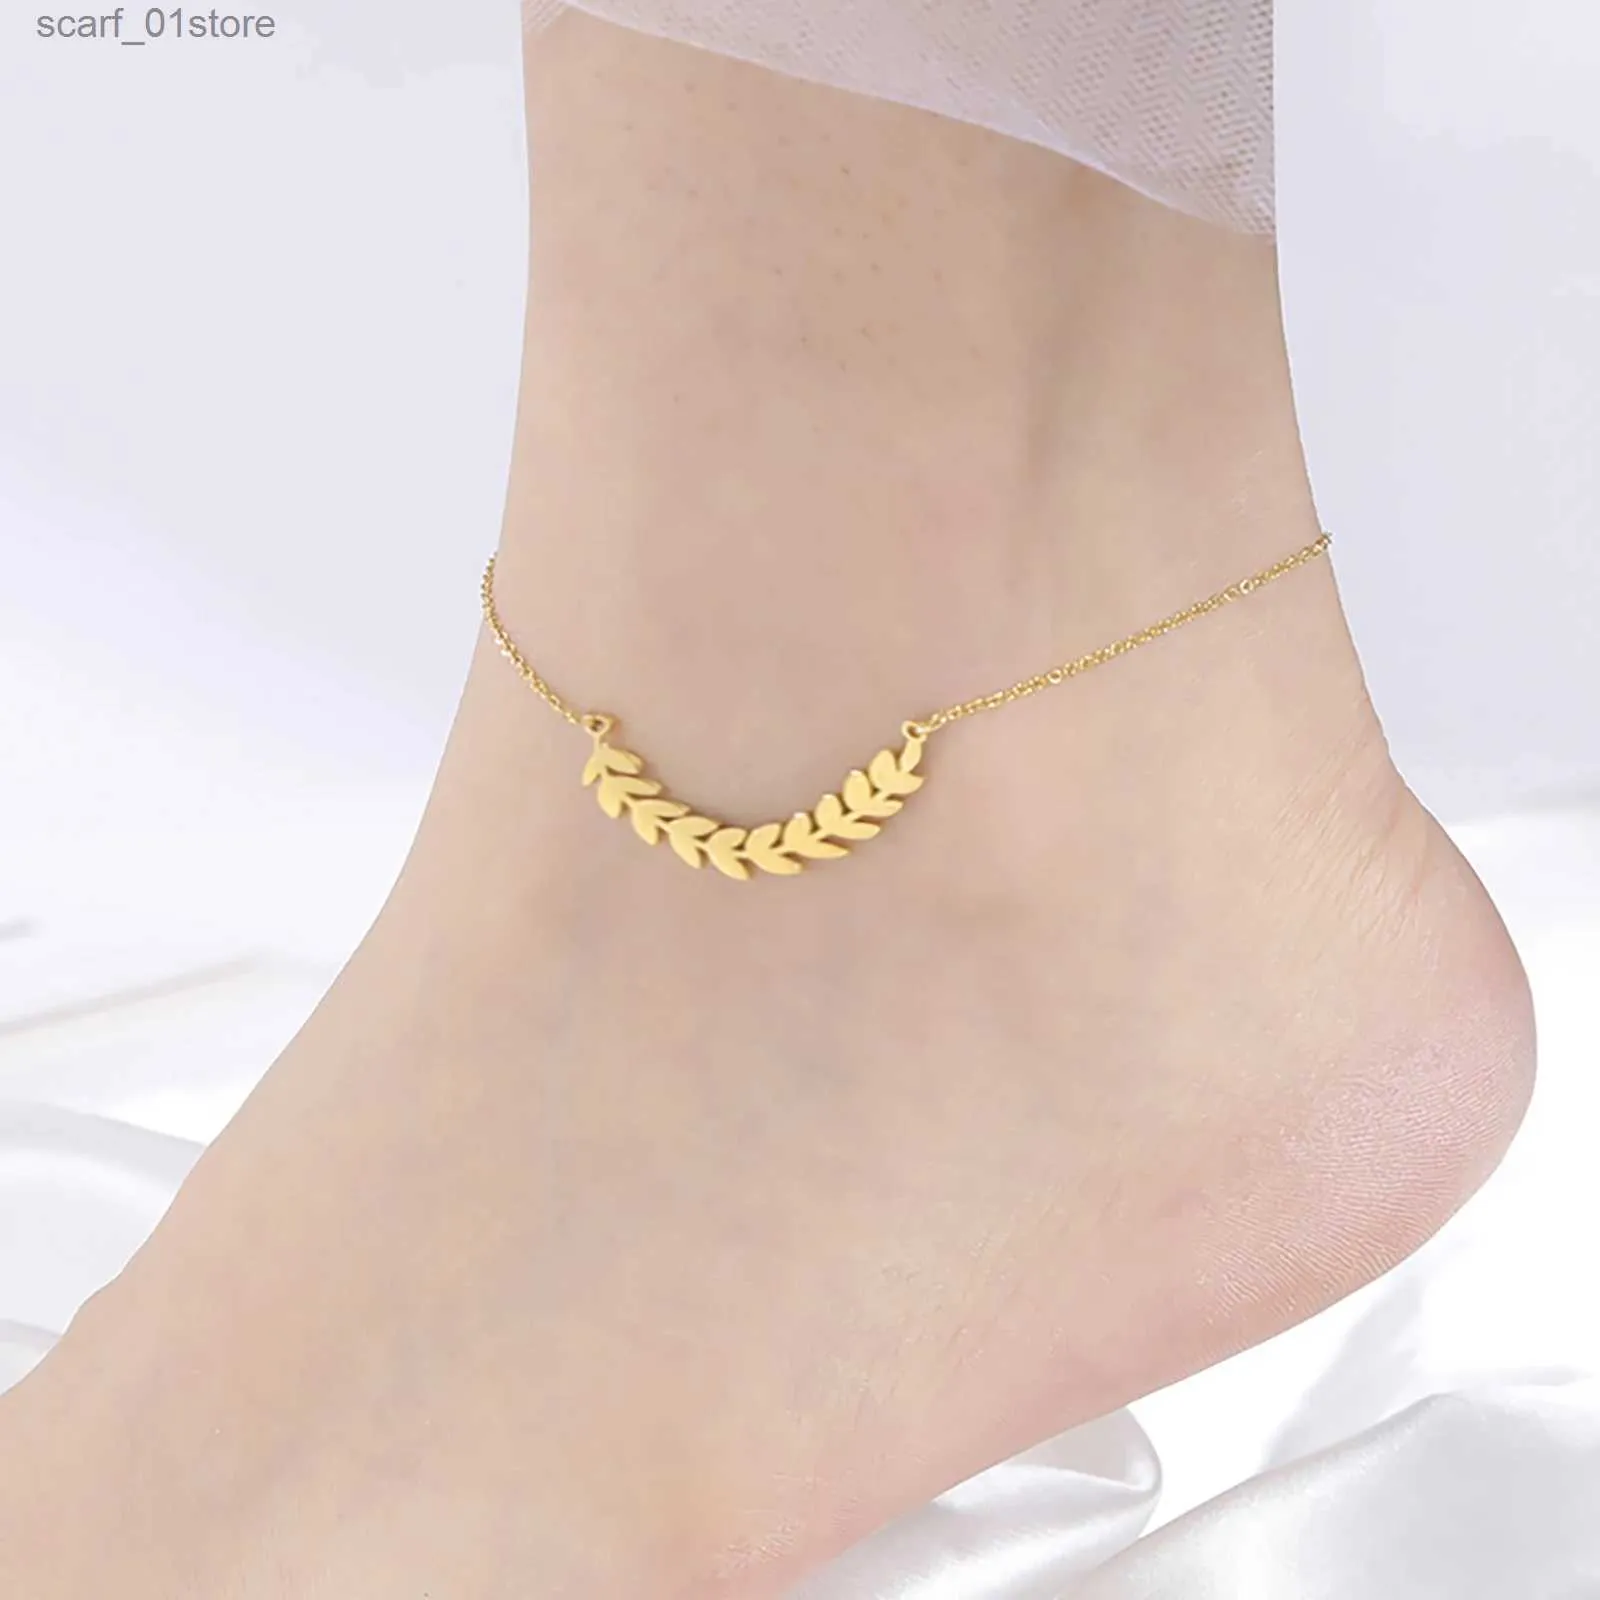 Anklets Skyrim Bohemia Leg Ankle Bracelet Stainless Steel Gold Color Ear of Wheat Tree Leaves Beach Foot Chain Anklet Jewelry for WomenL231219